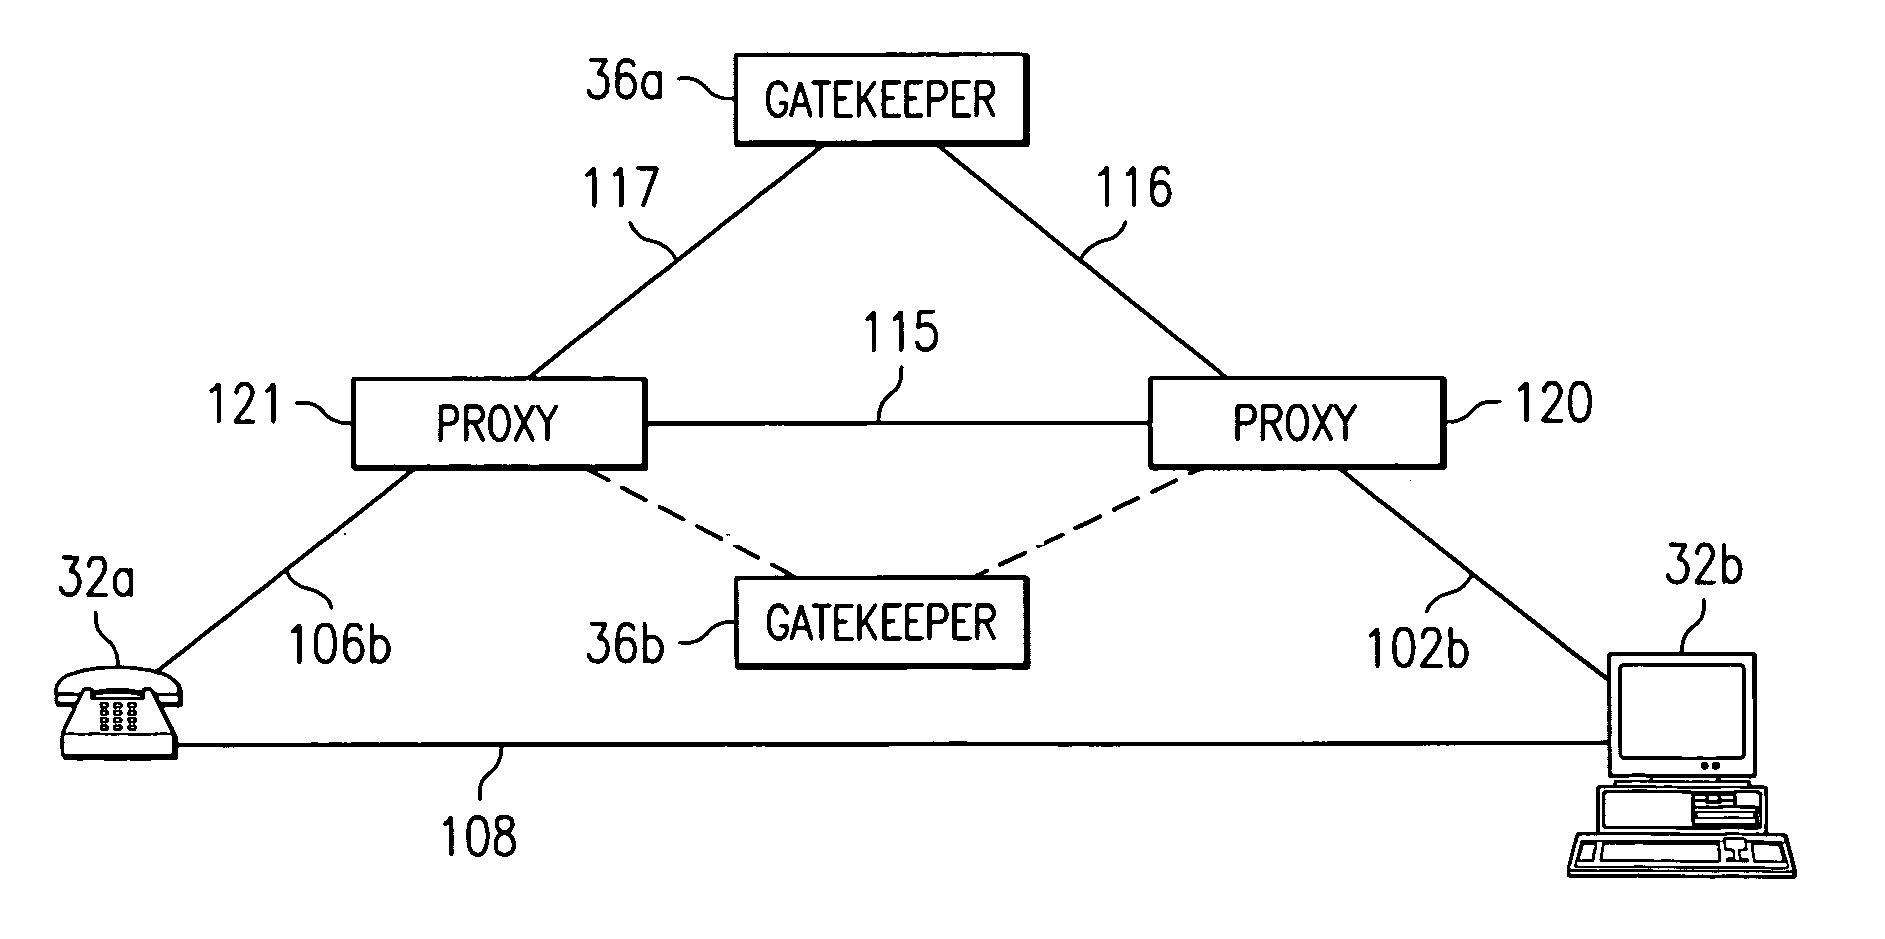 System and method for maintaining a communication session over gatekeeper failure